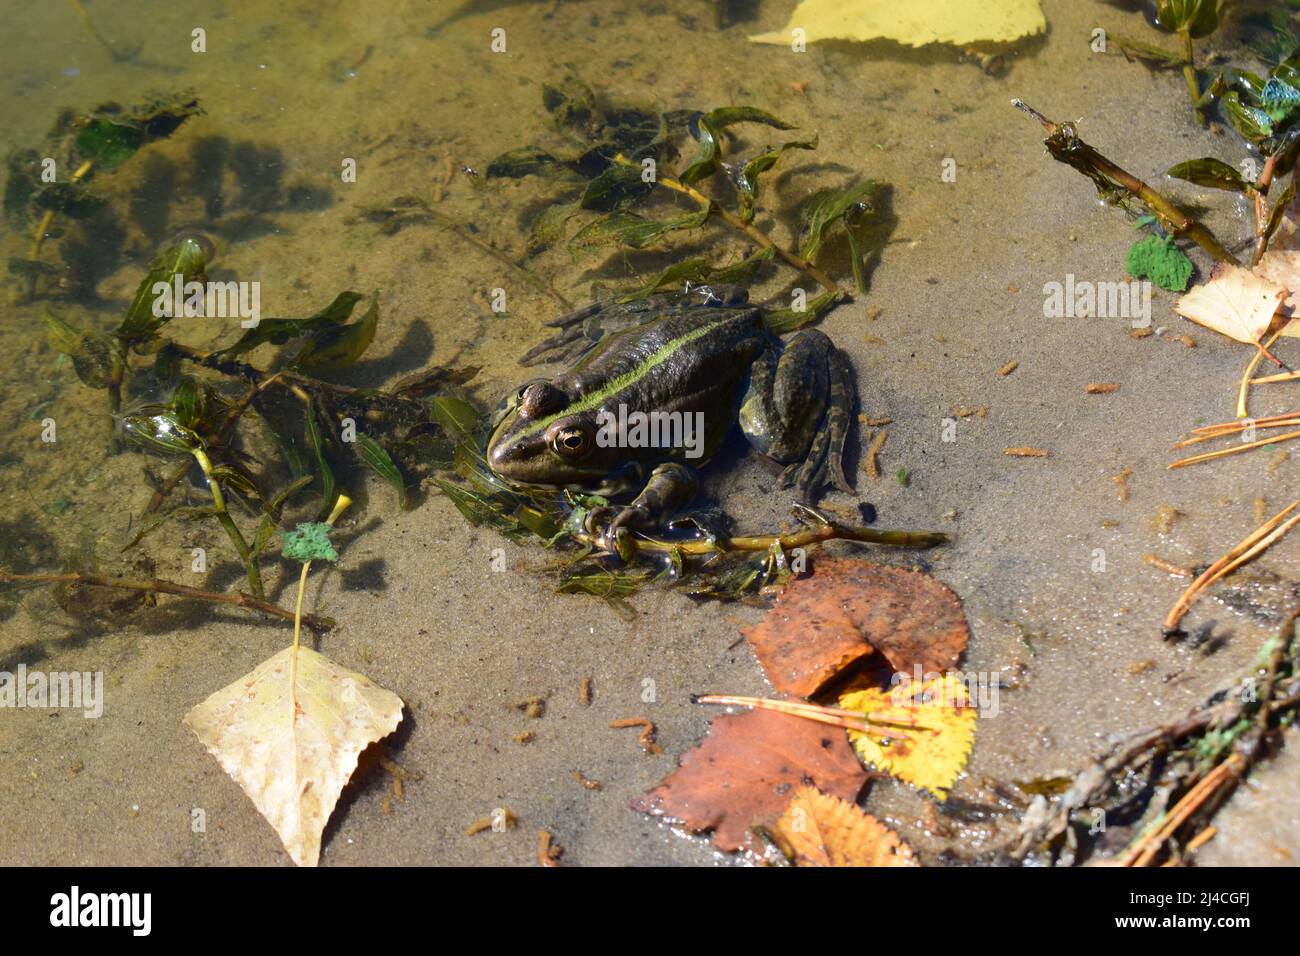 Pool frog in a forest lake. Cute and funny common green frog. Beautiful and colorful amphibian endangered by habitat loss. A green frog sitting in a w Stock Photo